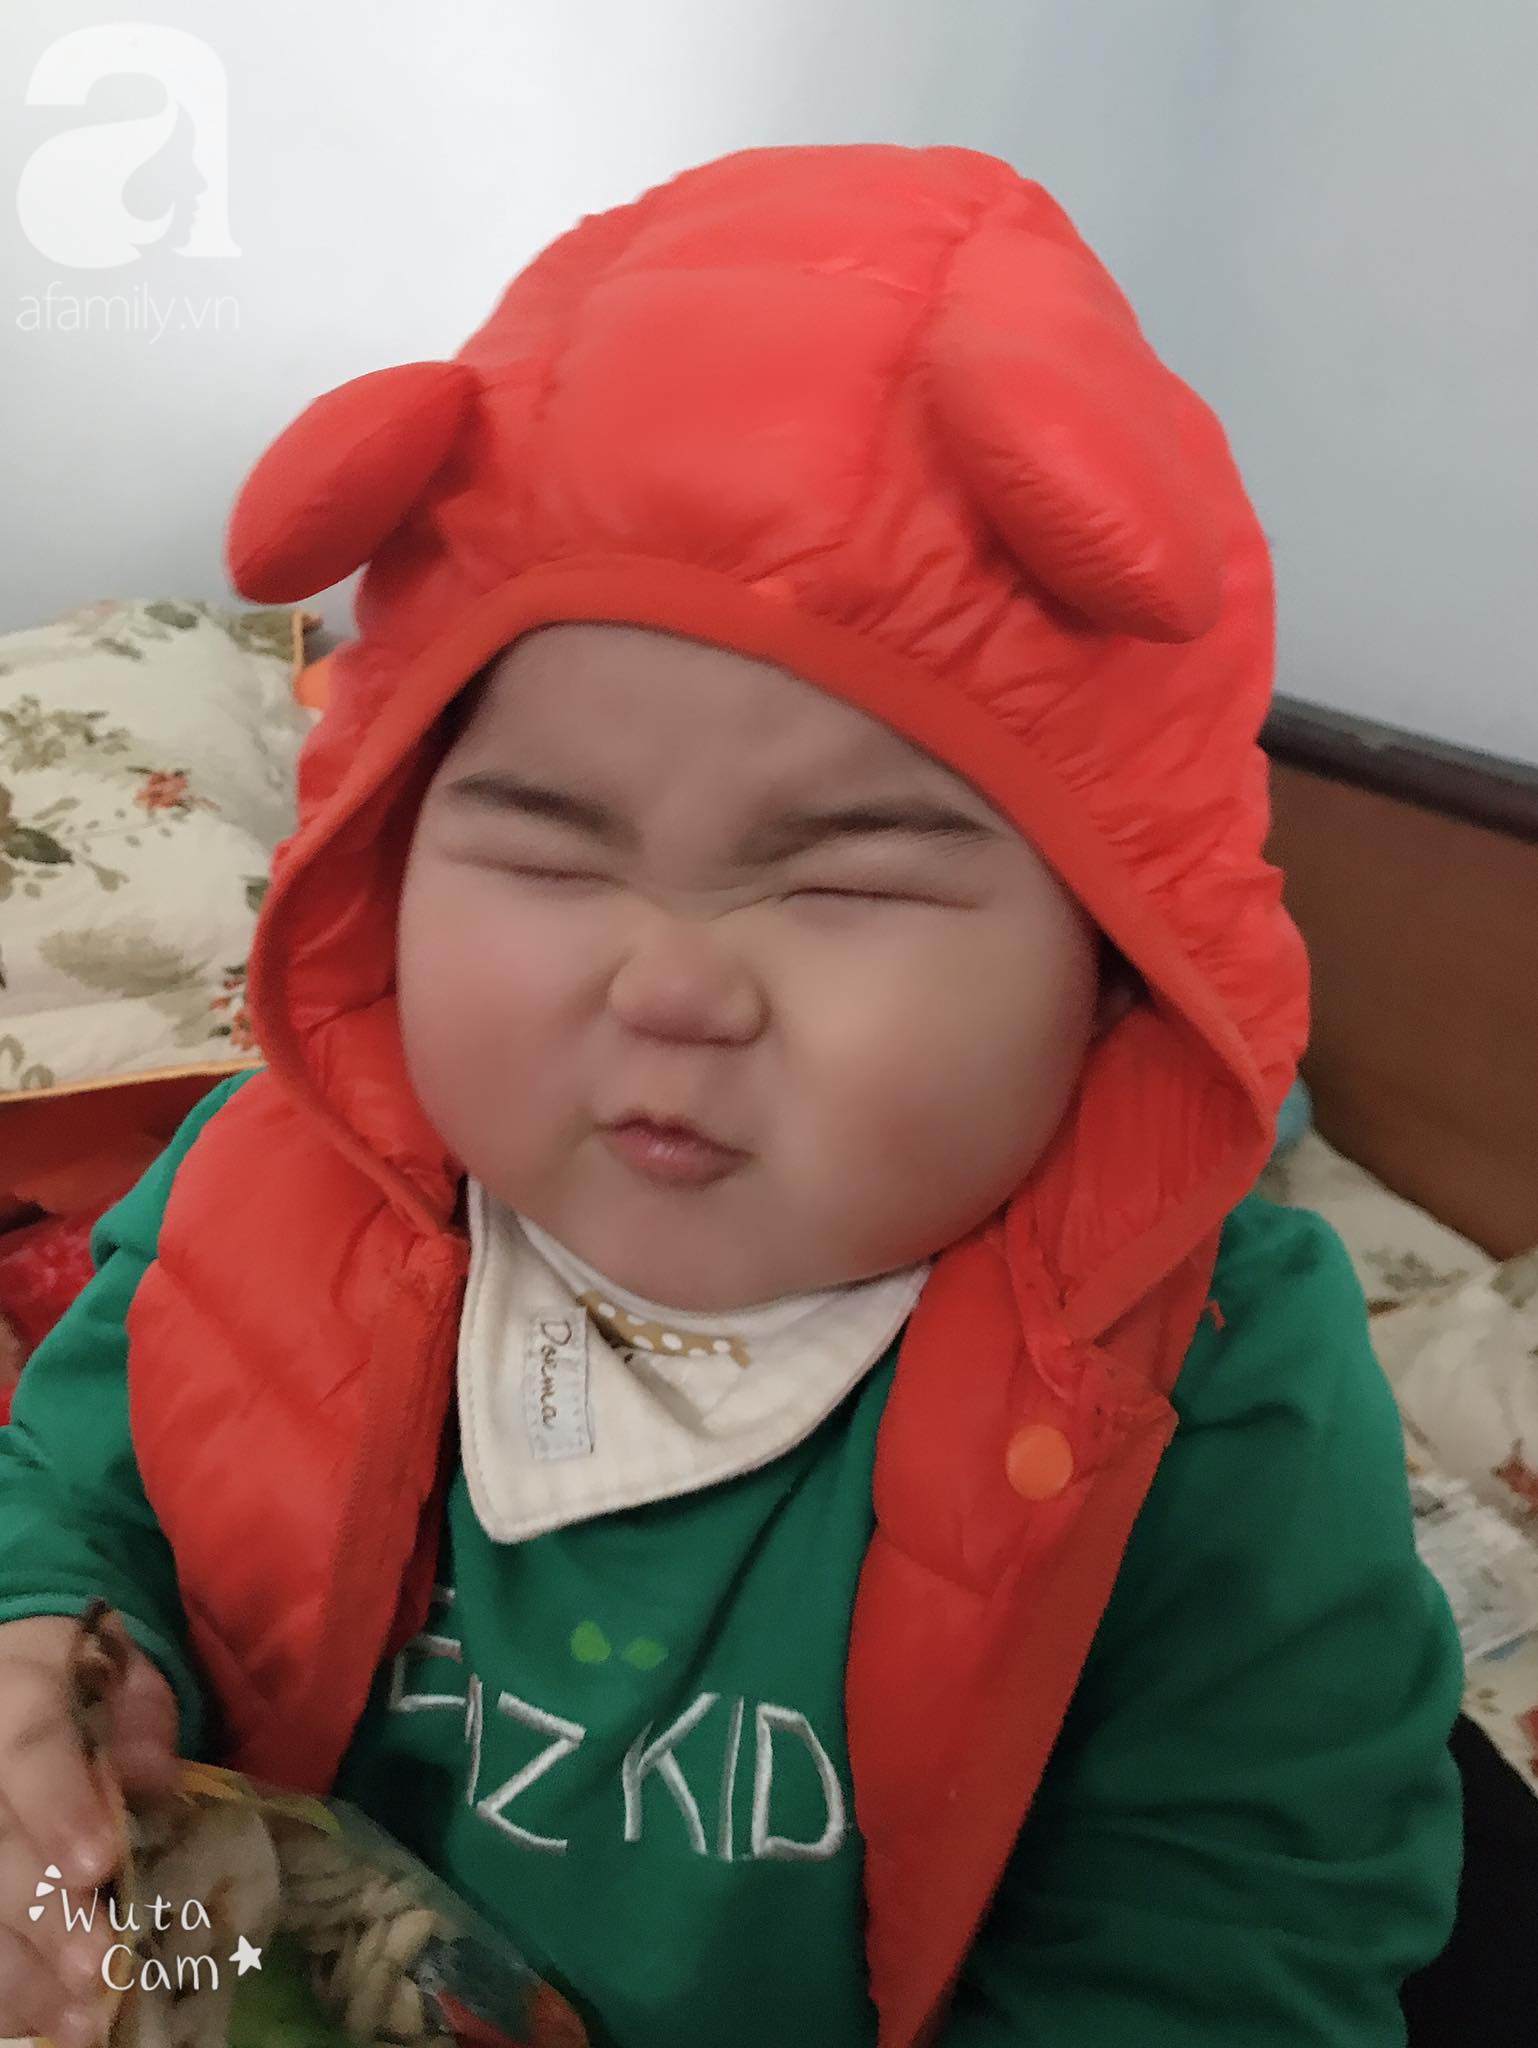 The picture of this chubby baby will definitely make you smile and feel full of joy. With a big body and bright red cheeks, your baby will remind you of your childhood and sweet memories of childhood.